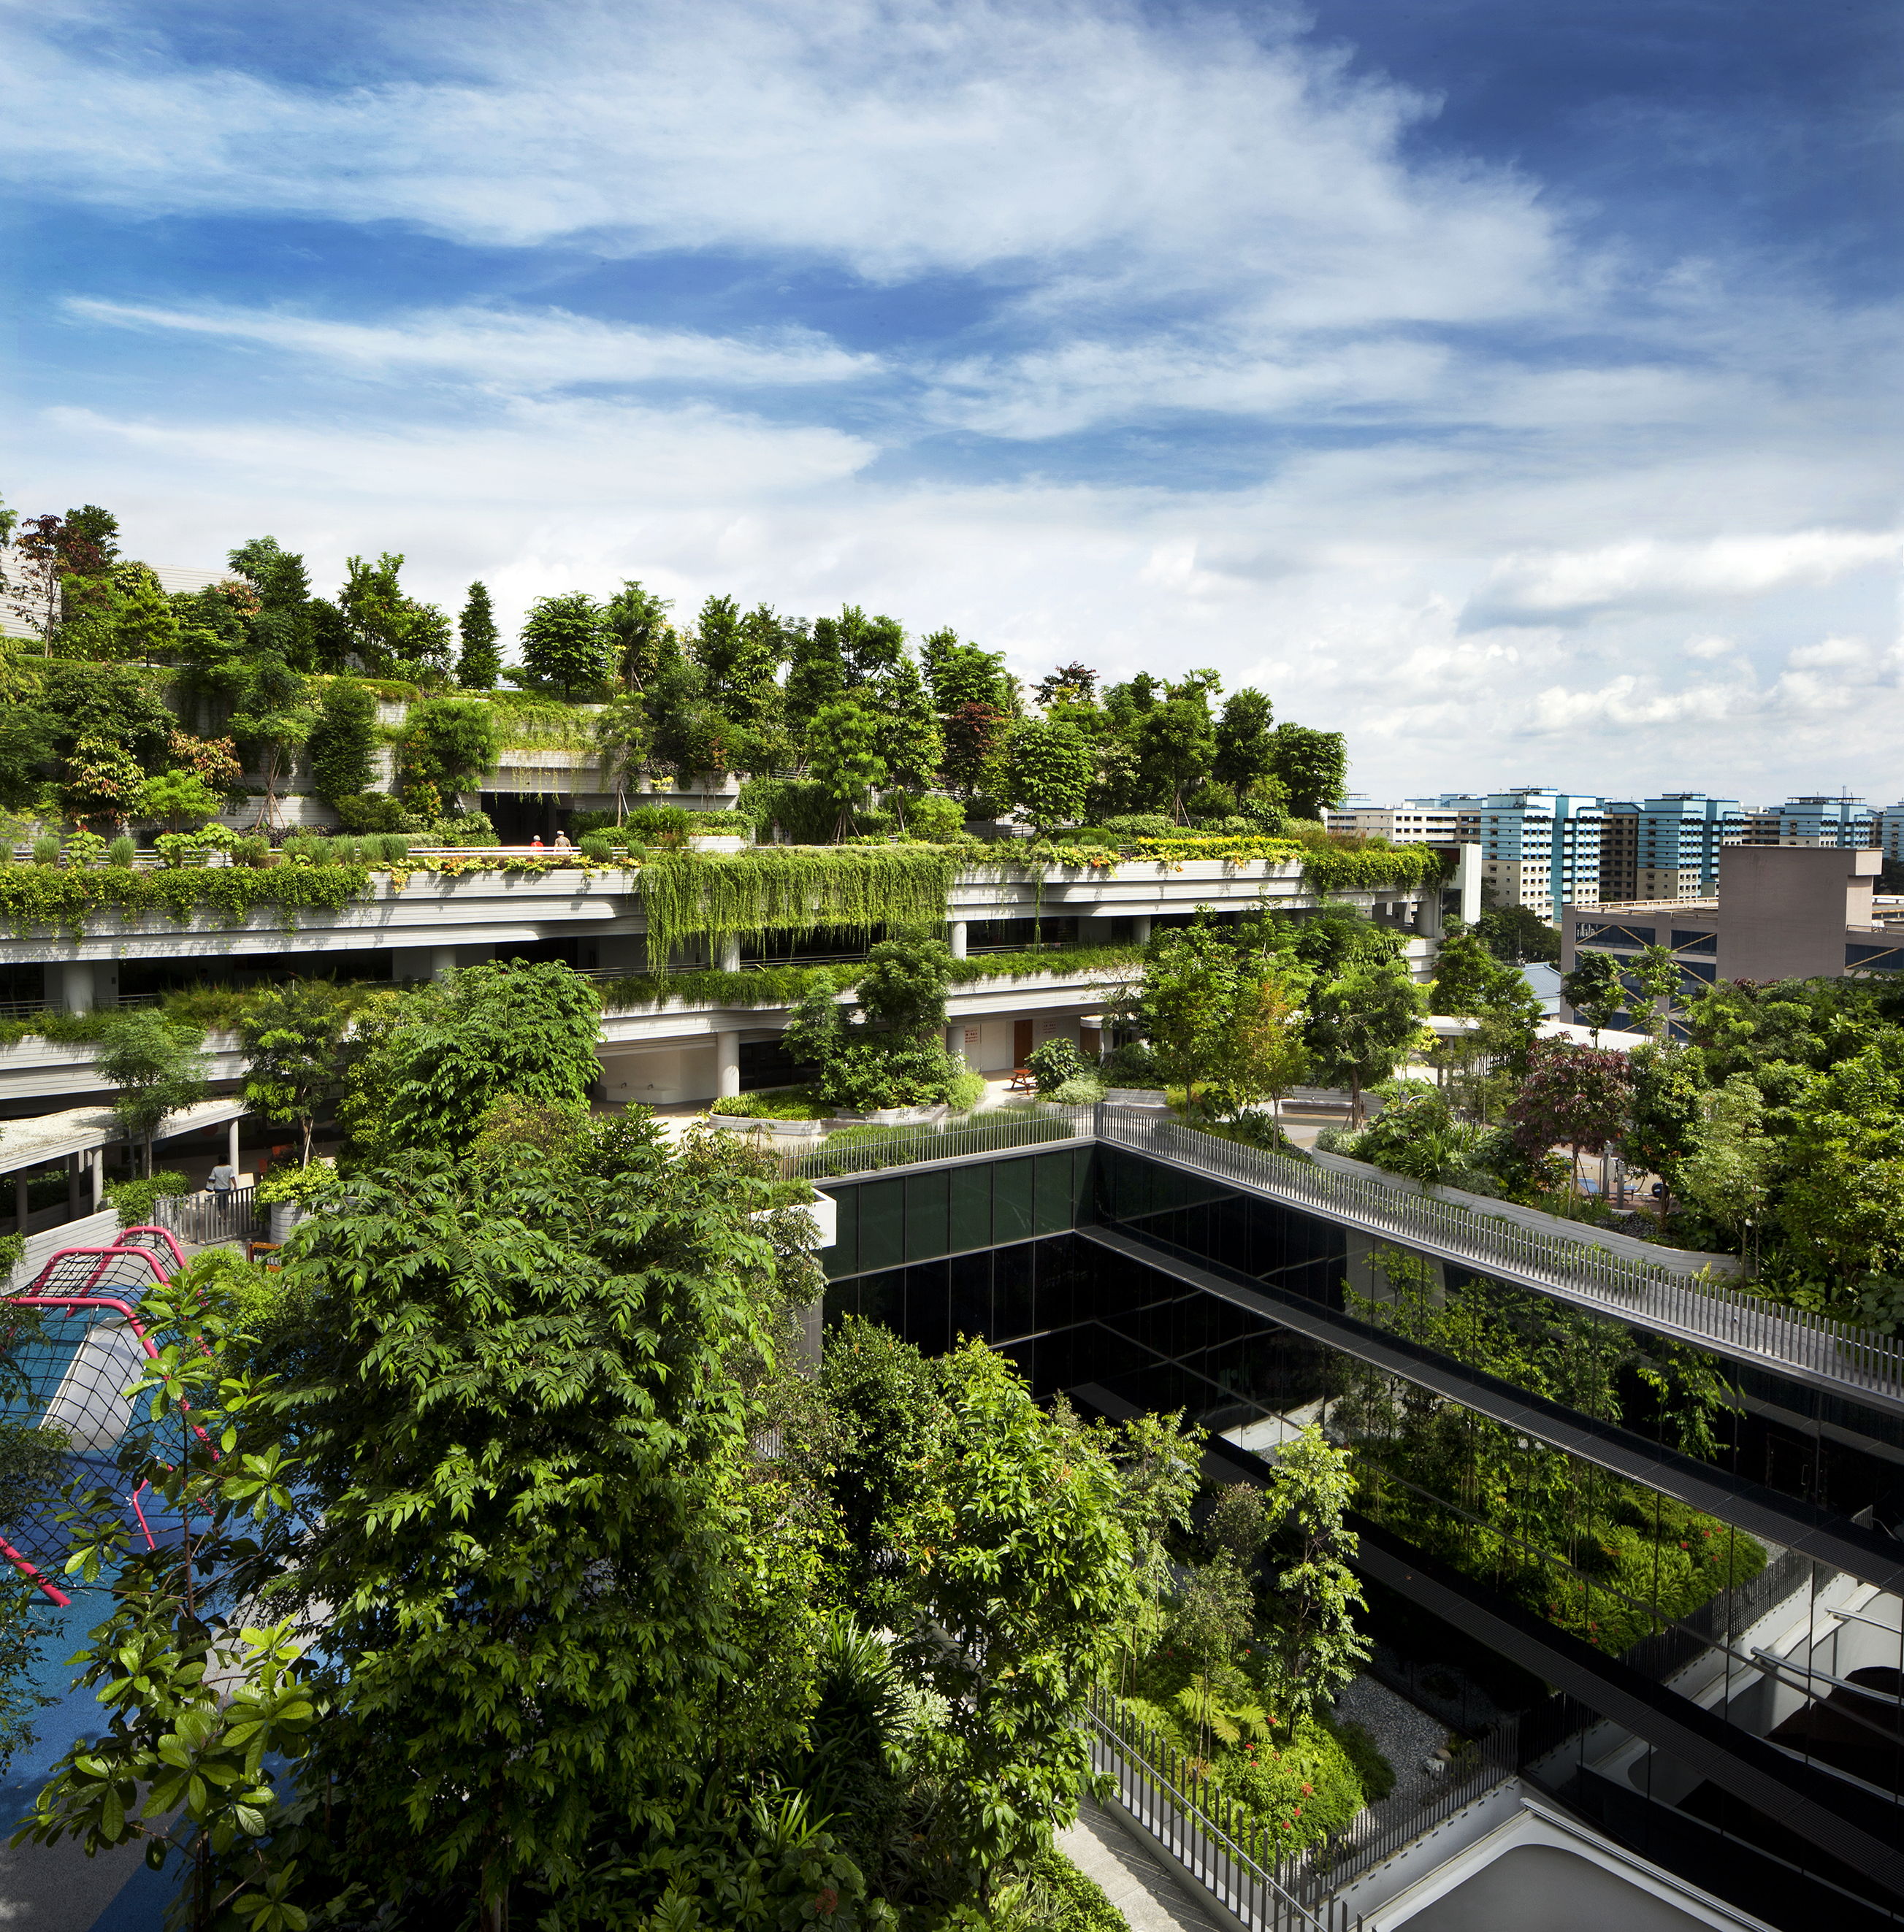 Kampung Admiralty by Ramboll Studio Dreiseitl (landscape design) and WOHA (architectural lead). Image: Patrick Bingham-Hall